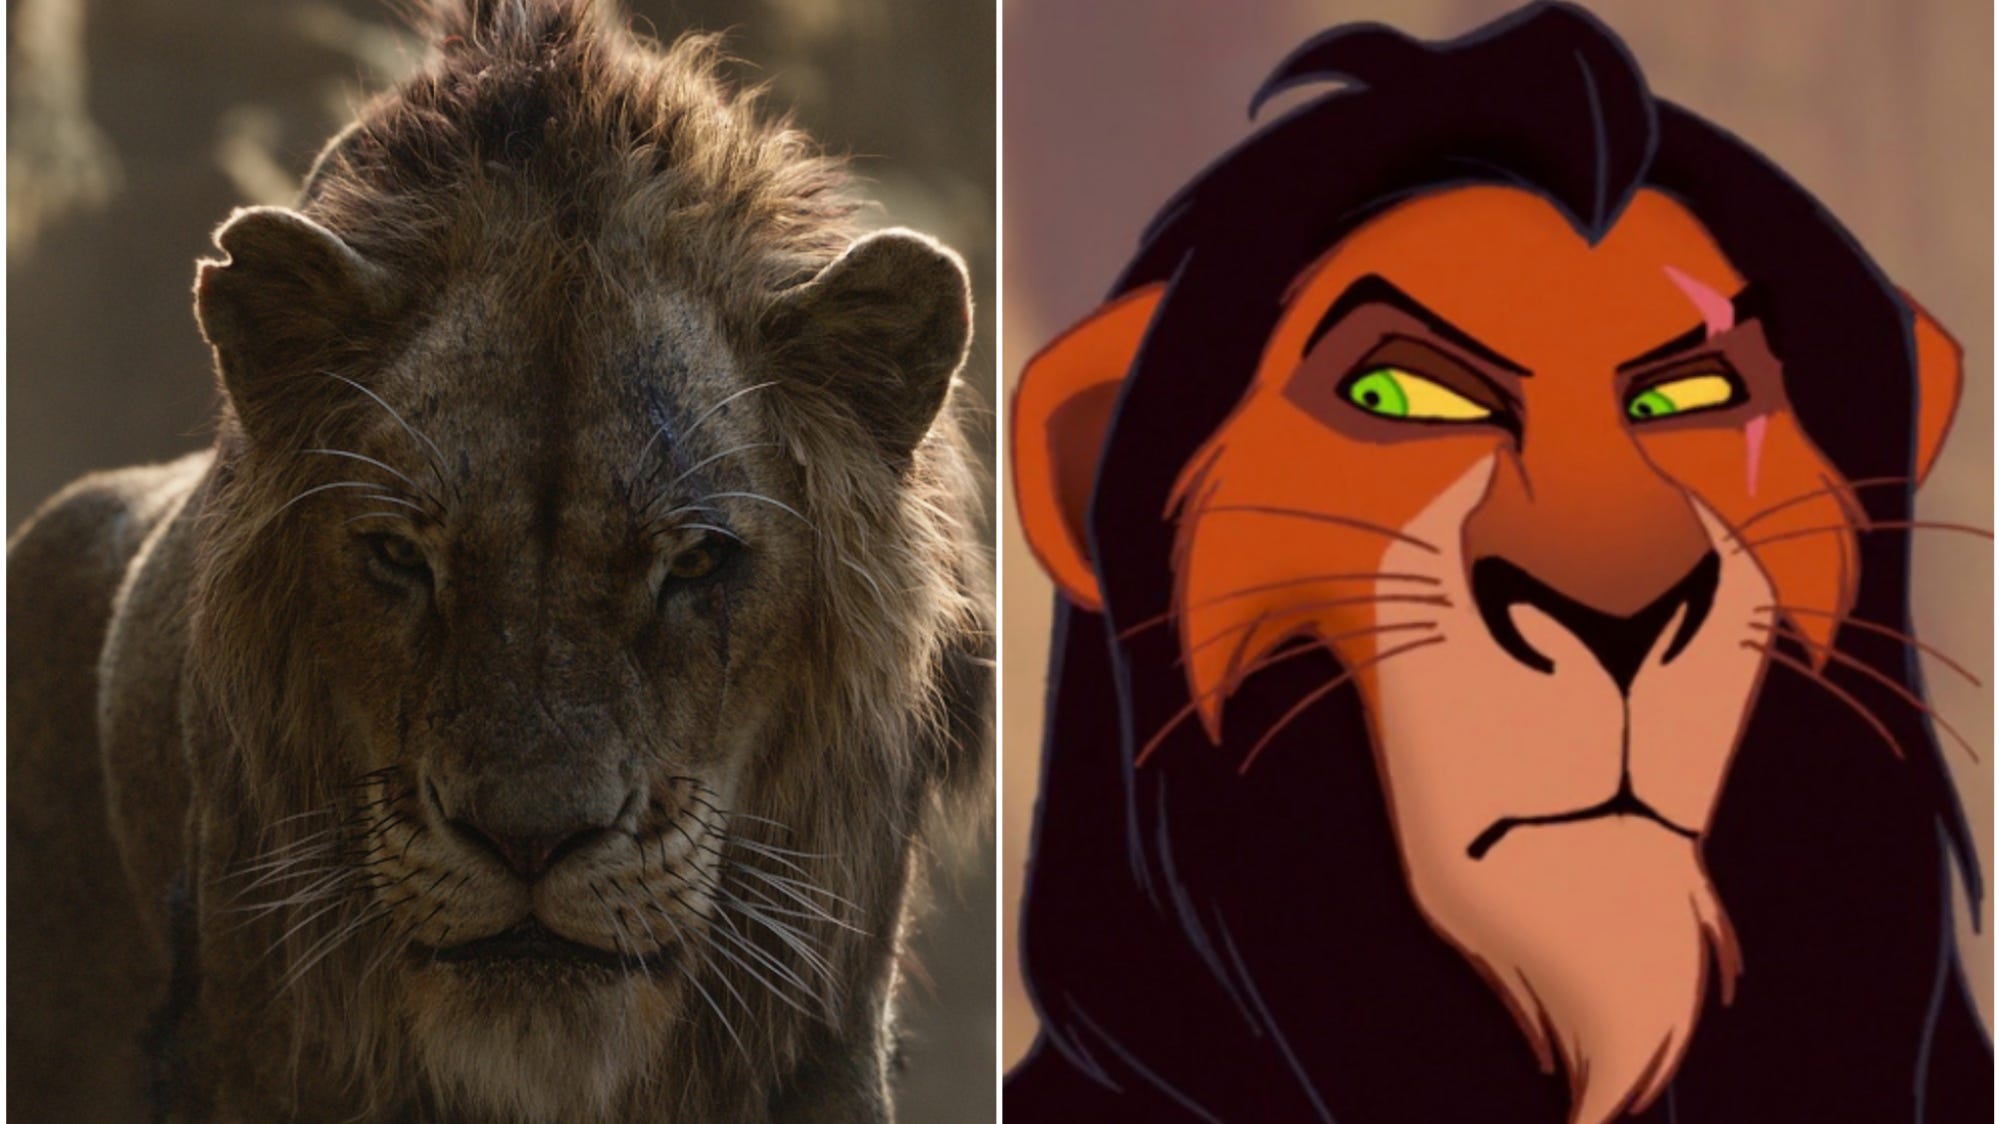 The Lion King Remake S Biggest Changes From The Original 1994 Movie